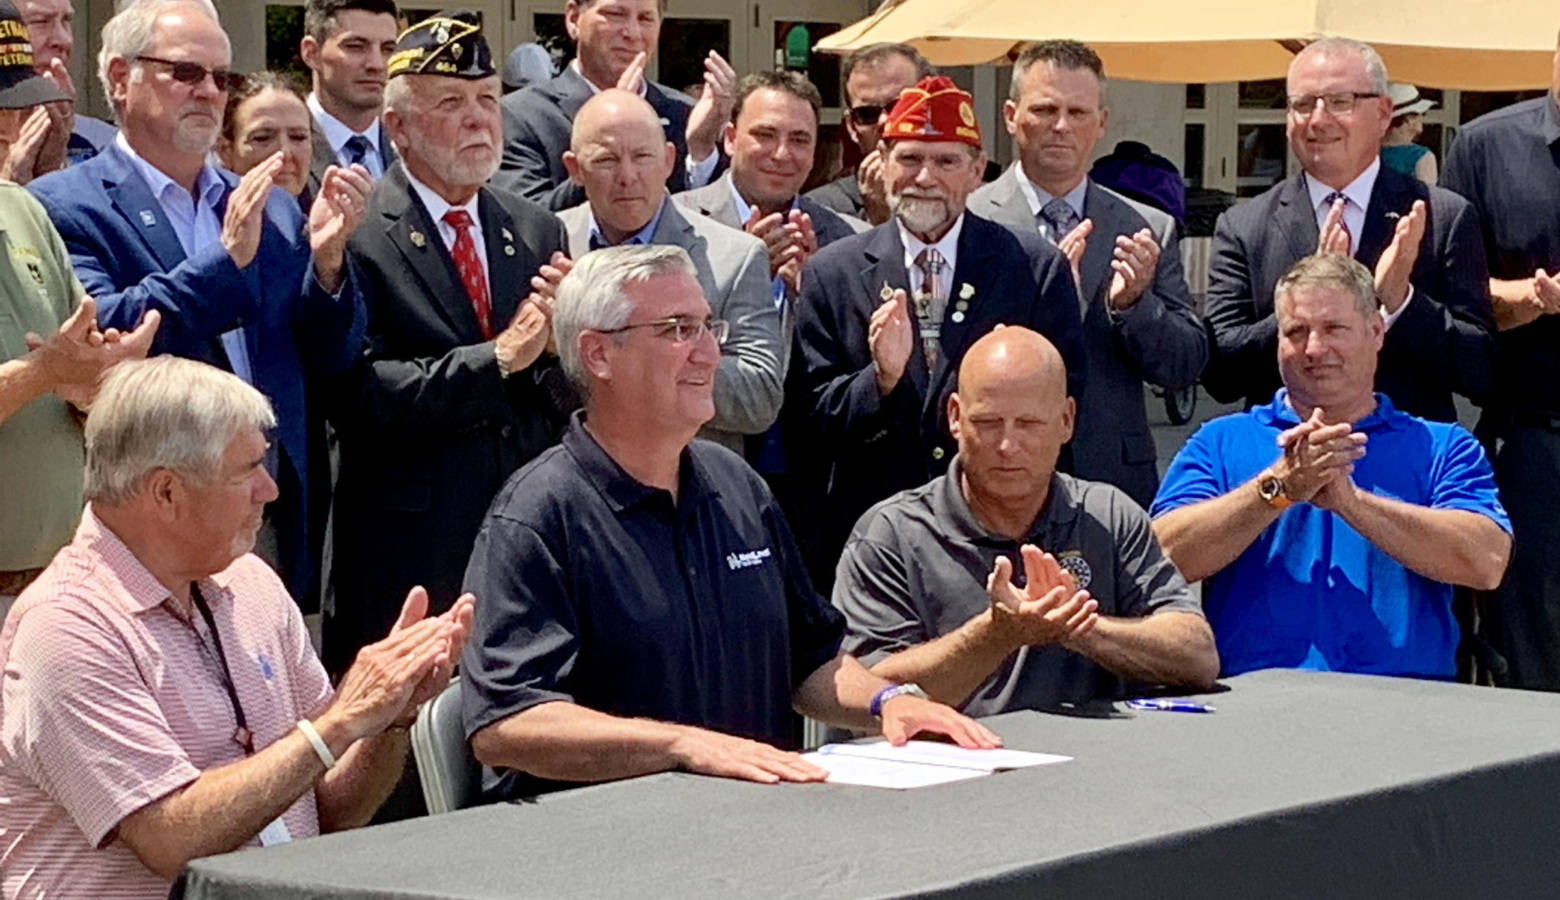 Gov. Eric Holcomb, seated center, at a ceremonial bill signing for the military pension tax exemption. (Brandon Smith/IPB News)